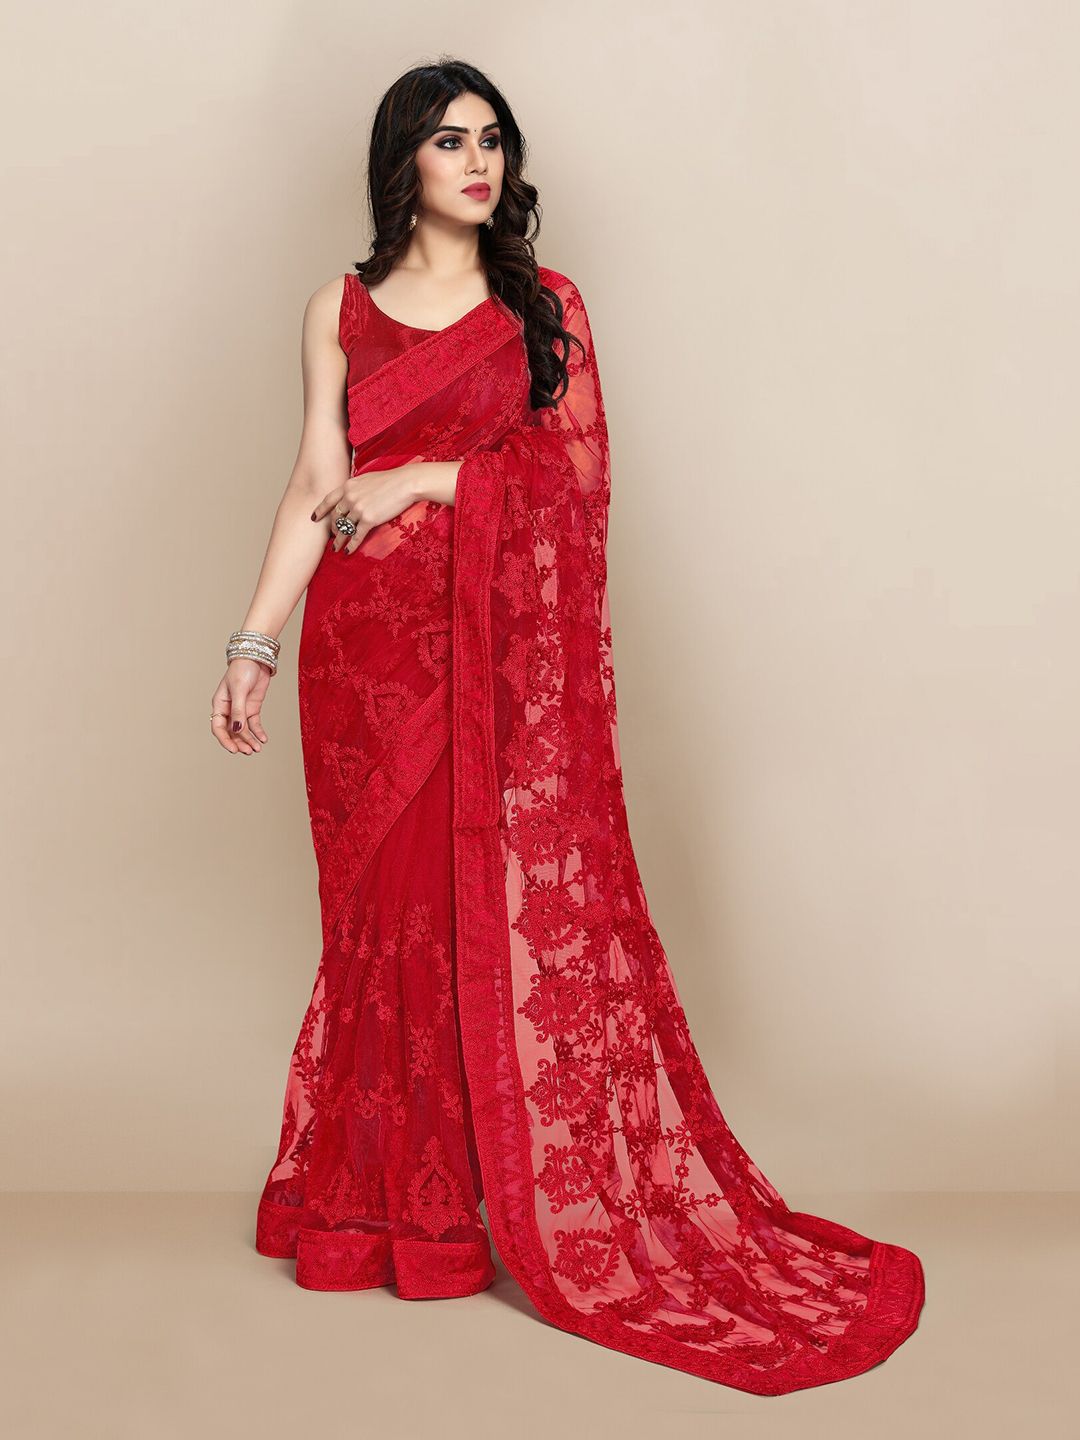 VAIRAGEE Red Ethnic Motifs Embroidered Net Saree Price in India